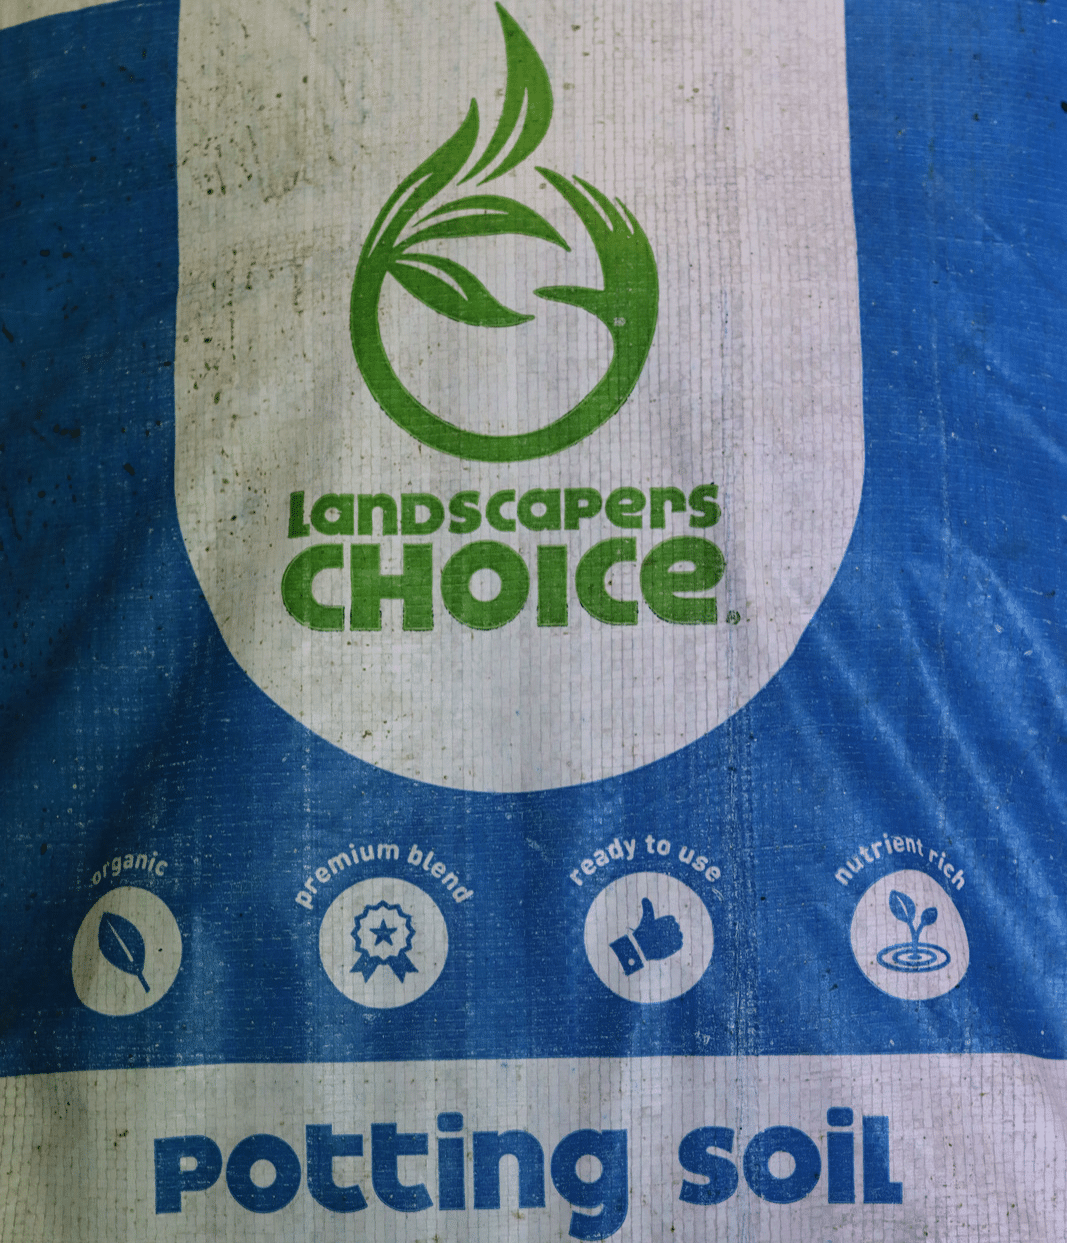 A blue and white bag of Landscapers Choice organic potting soil.